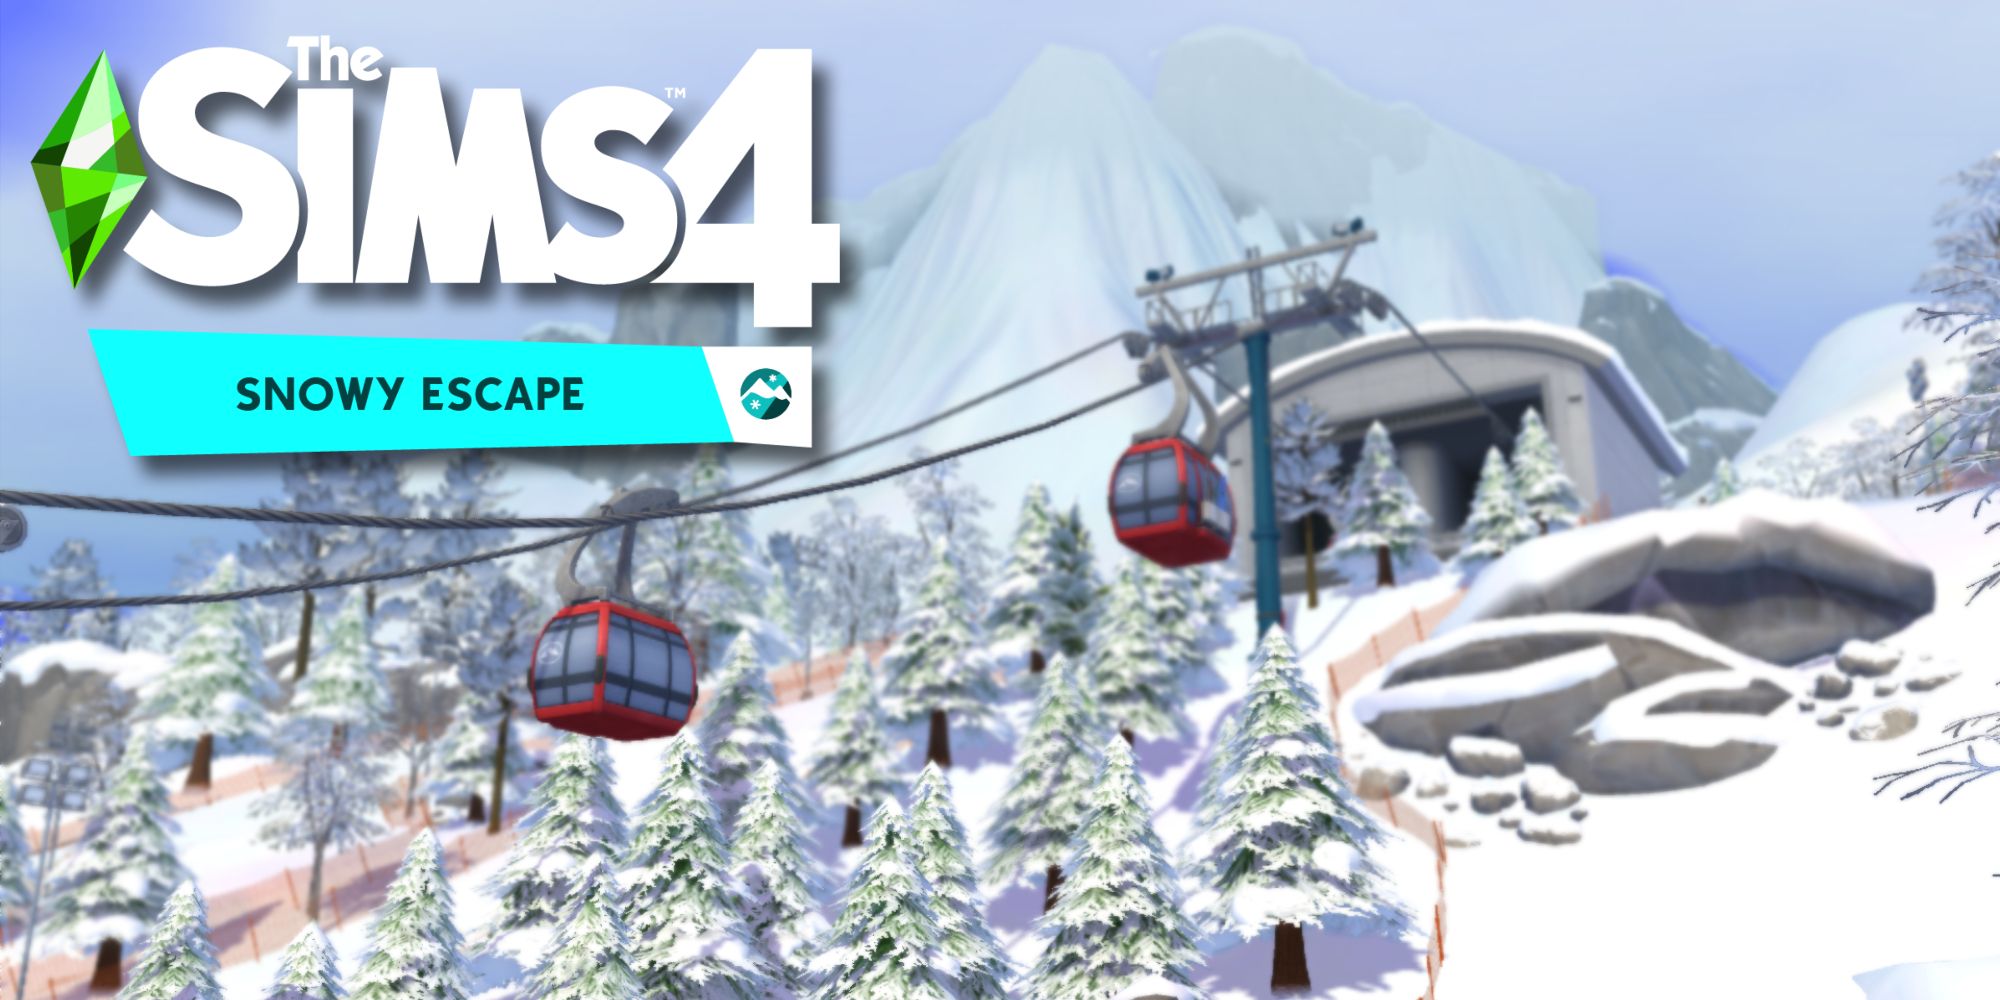 Mt. Komorebi is the coldest world in The Sims 4, pictured is the chairlift and the mountain in the background